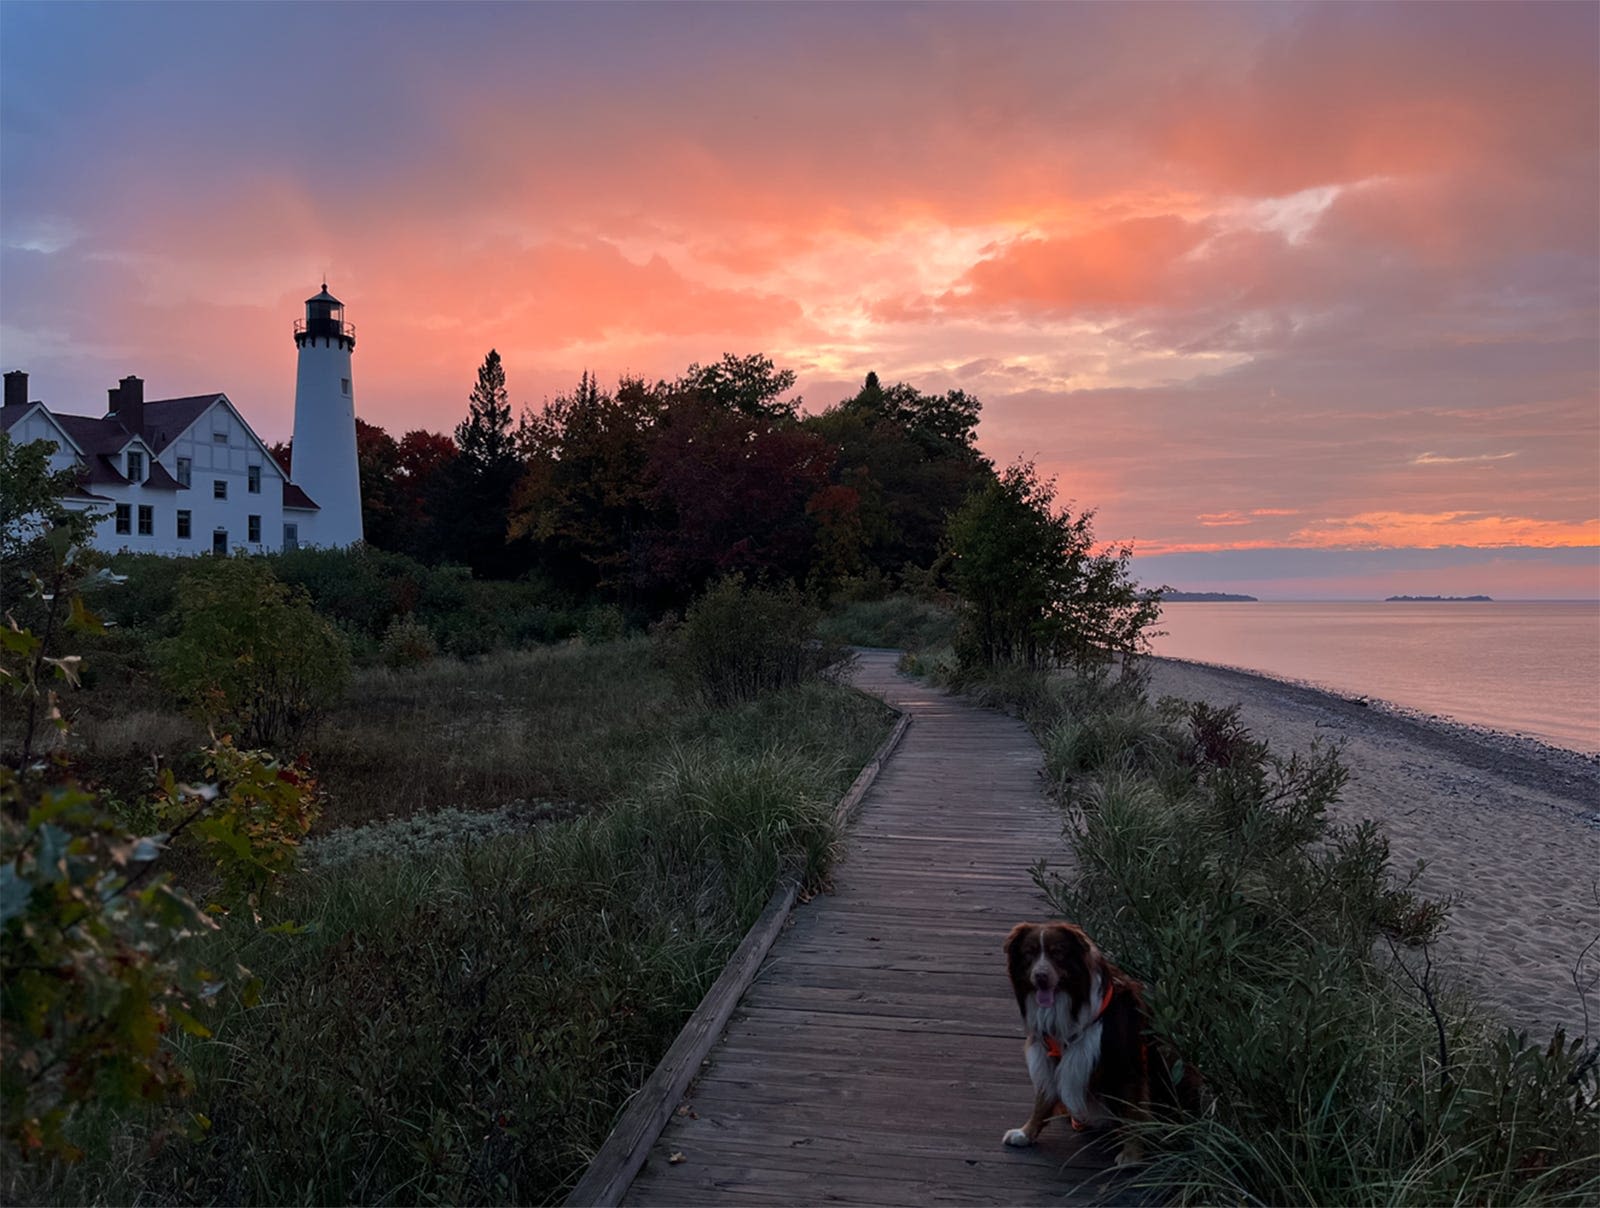 Learn all about Northern Michigan’s many lighthouses